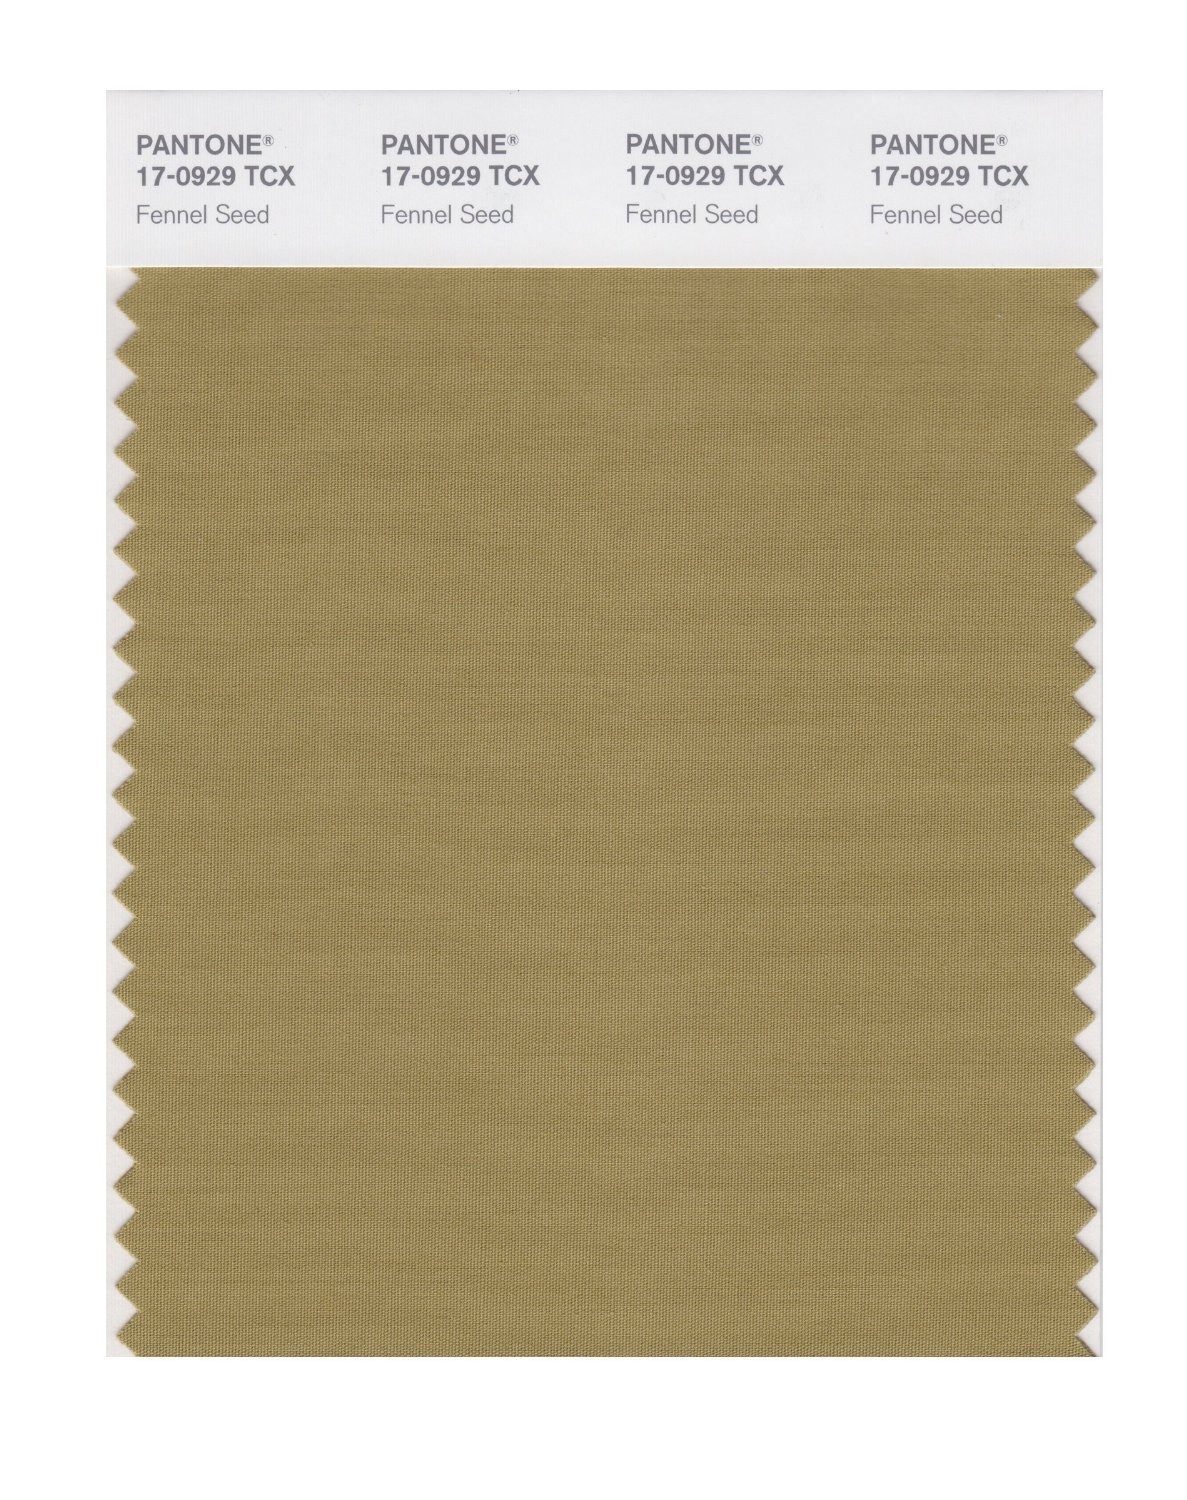 Pantone Cotton Swatch 17-0929 Fennel Seed